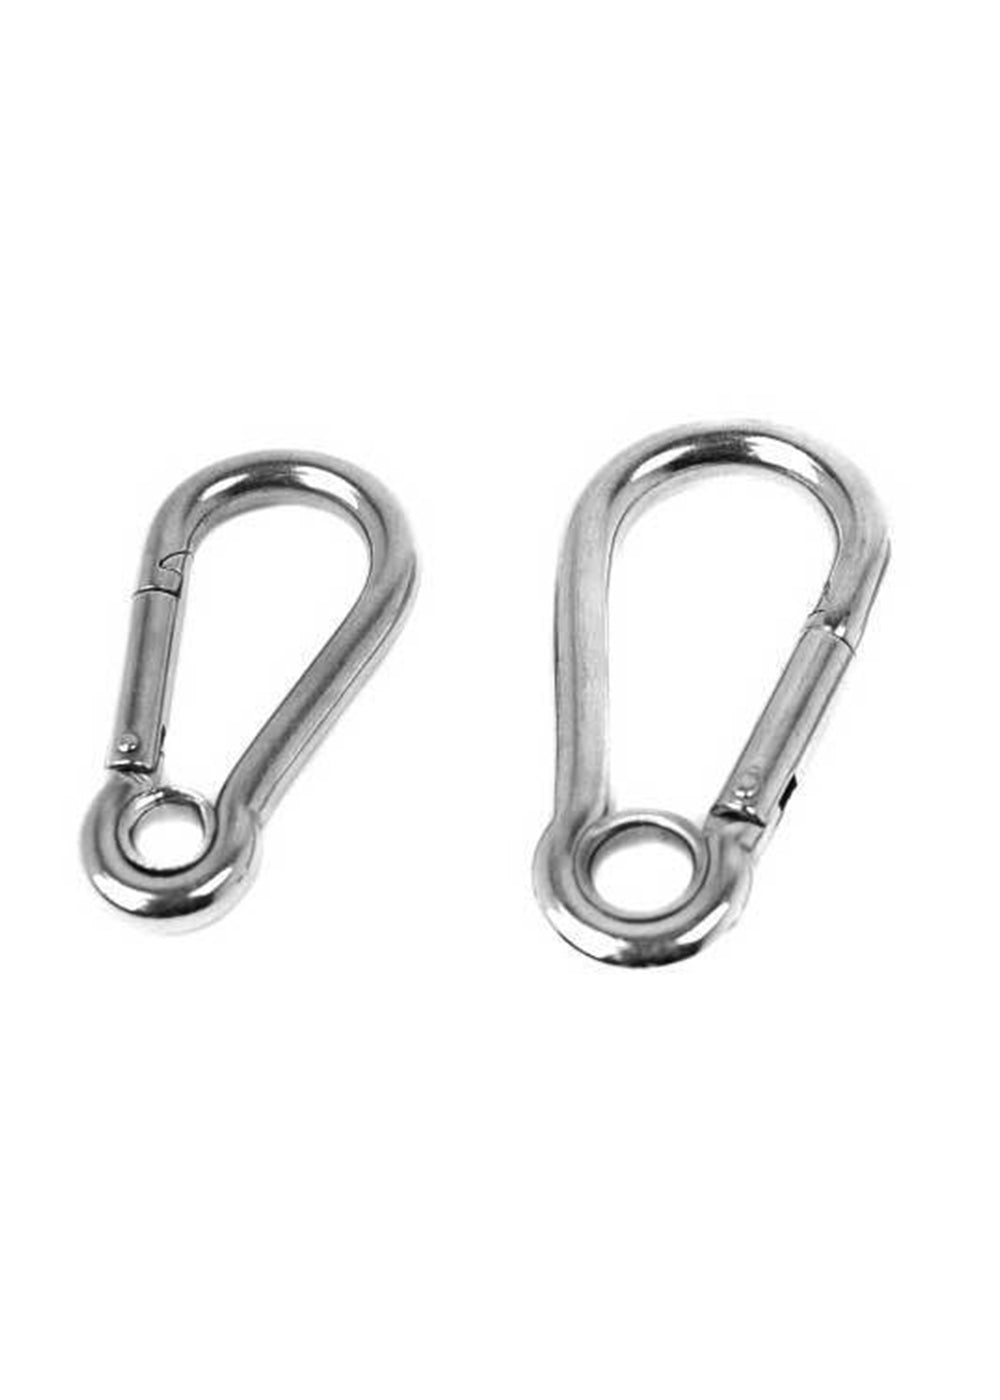 Problue Stainless Steel Carabiner with Eye